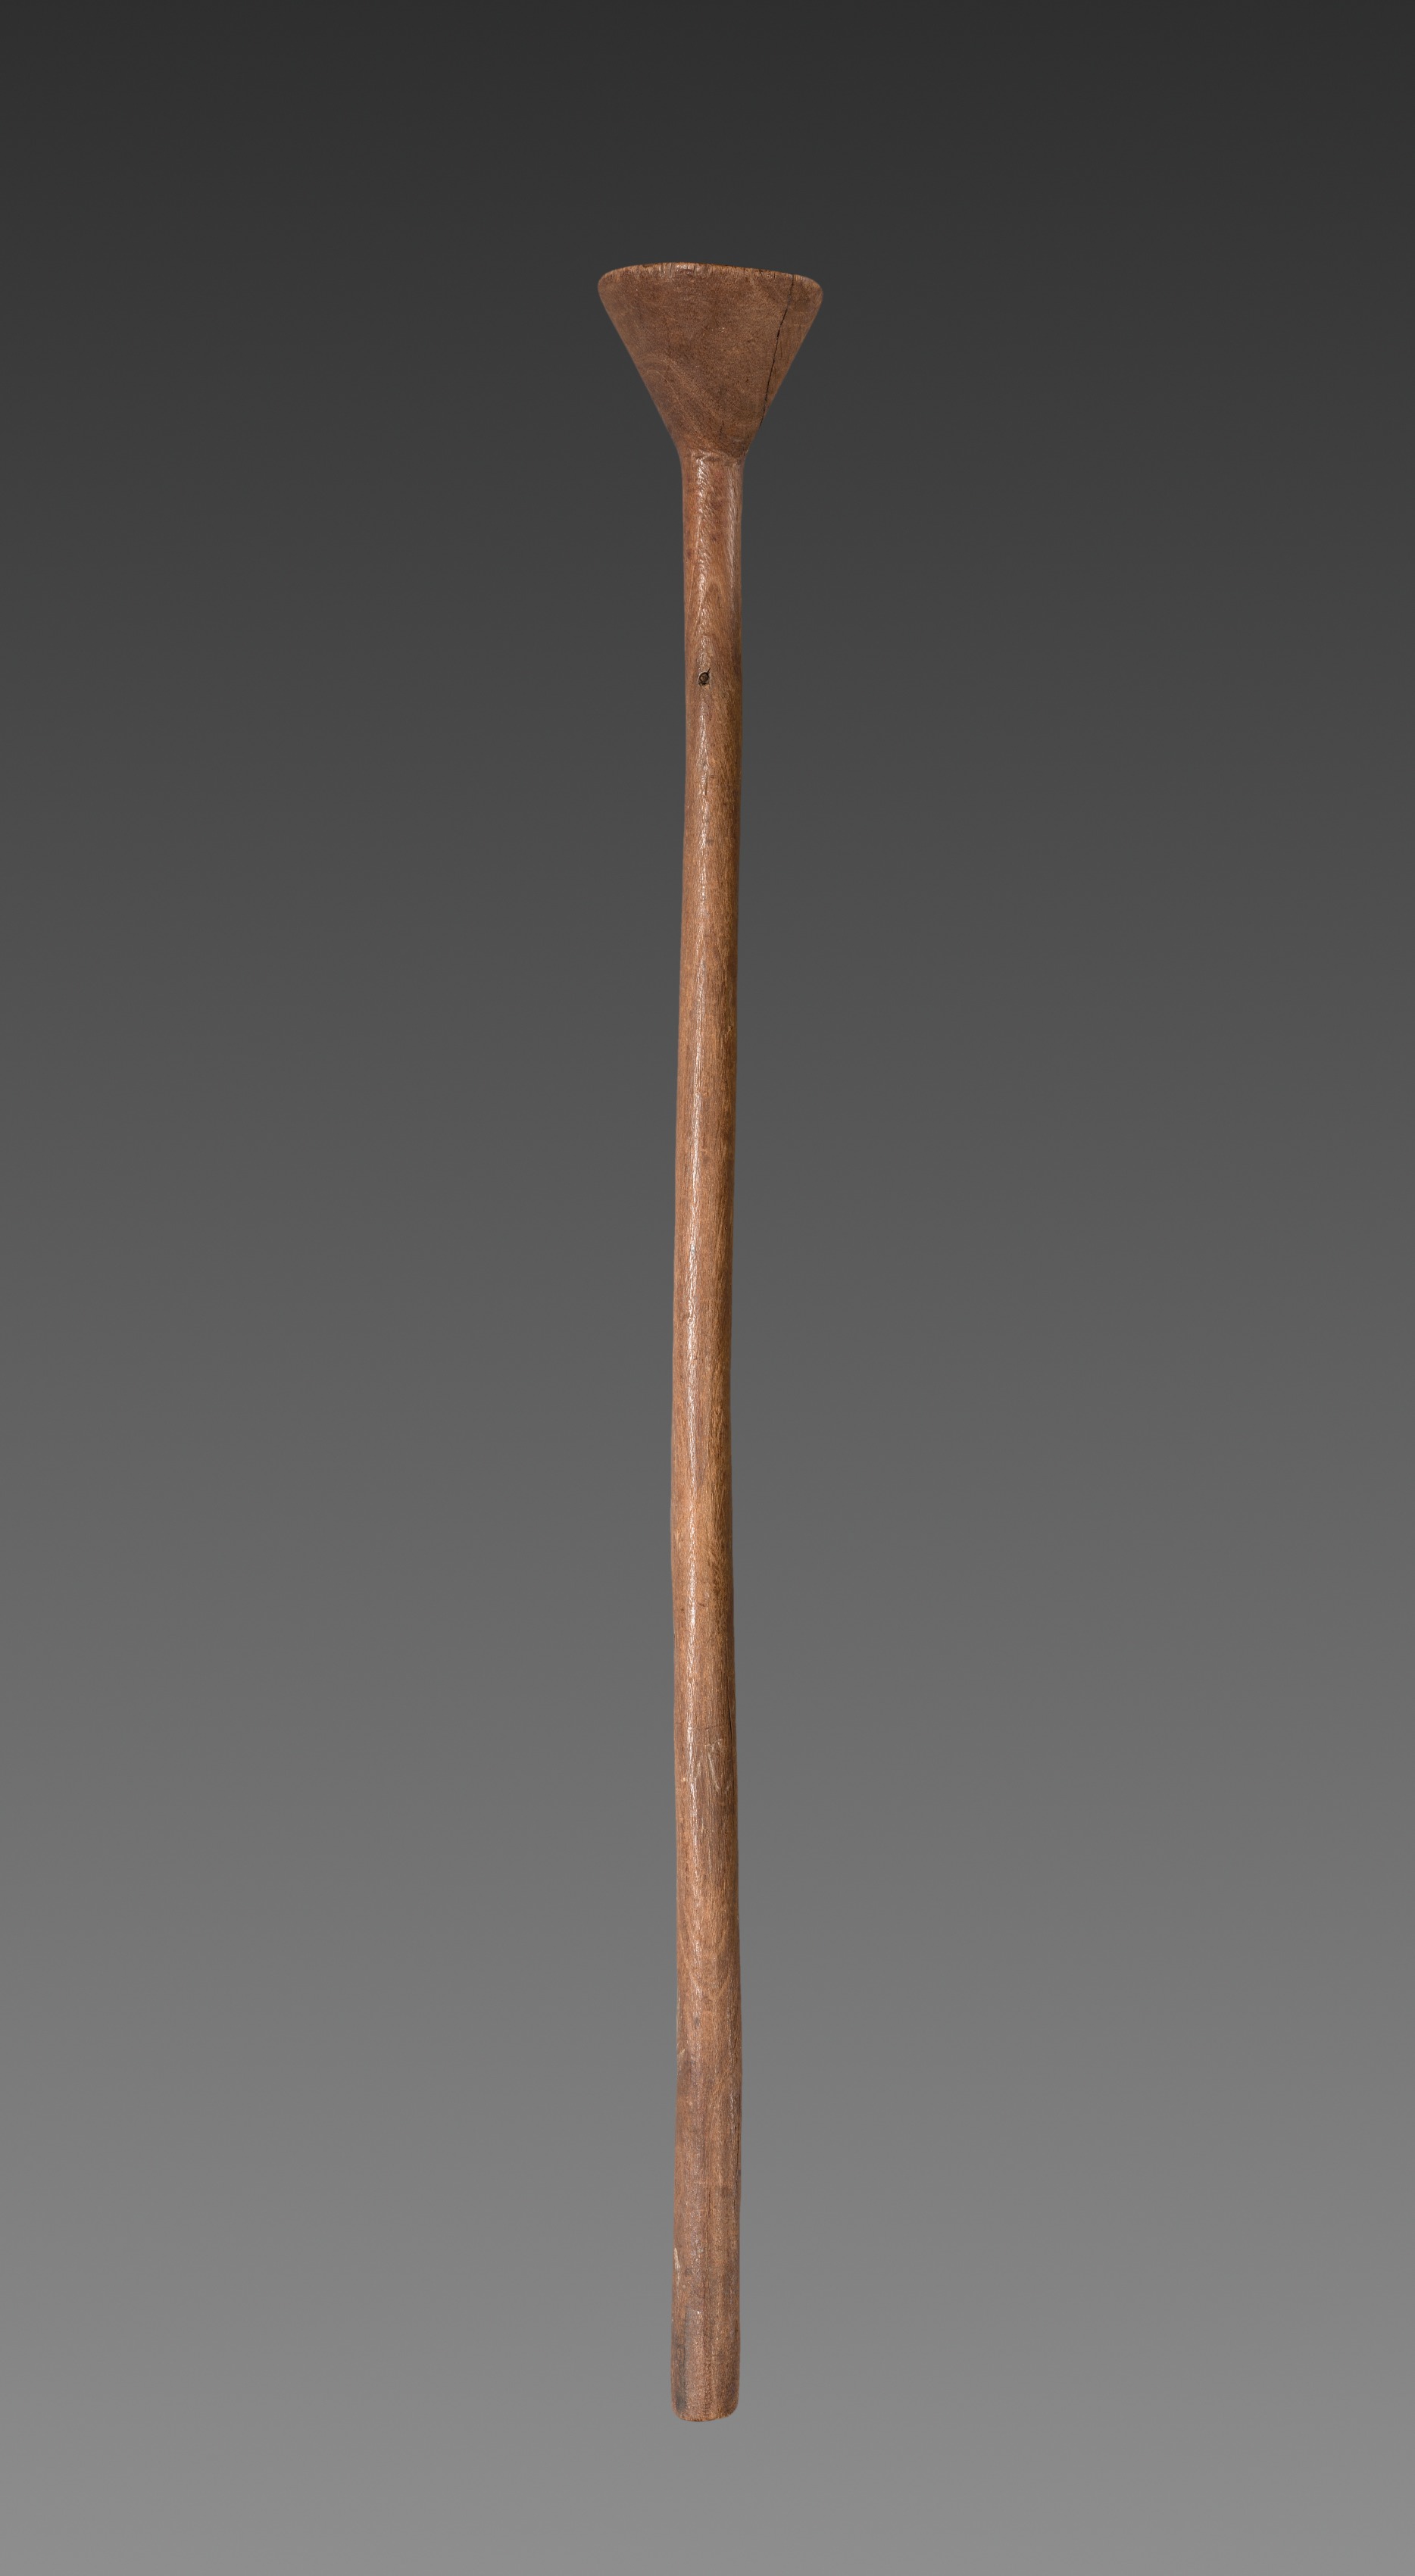 Wooden Staff or Support